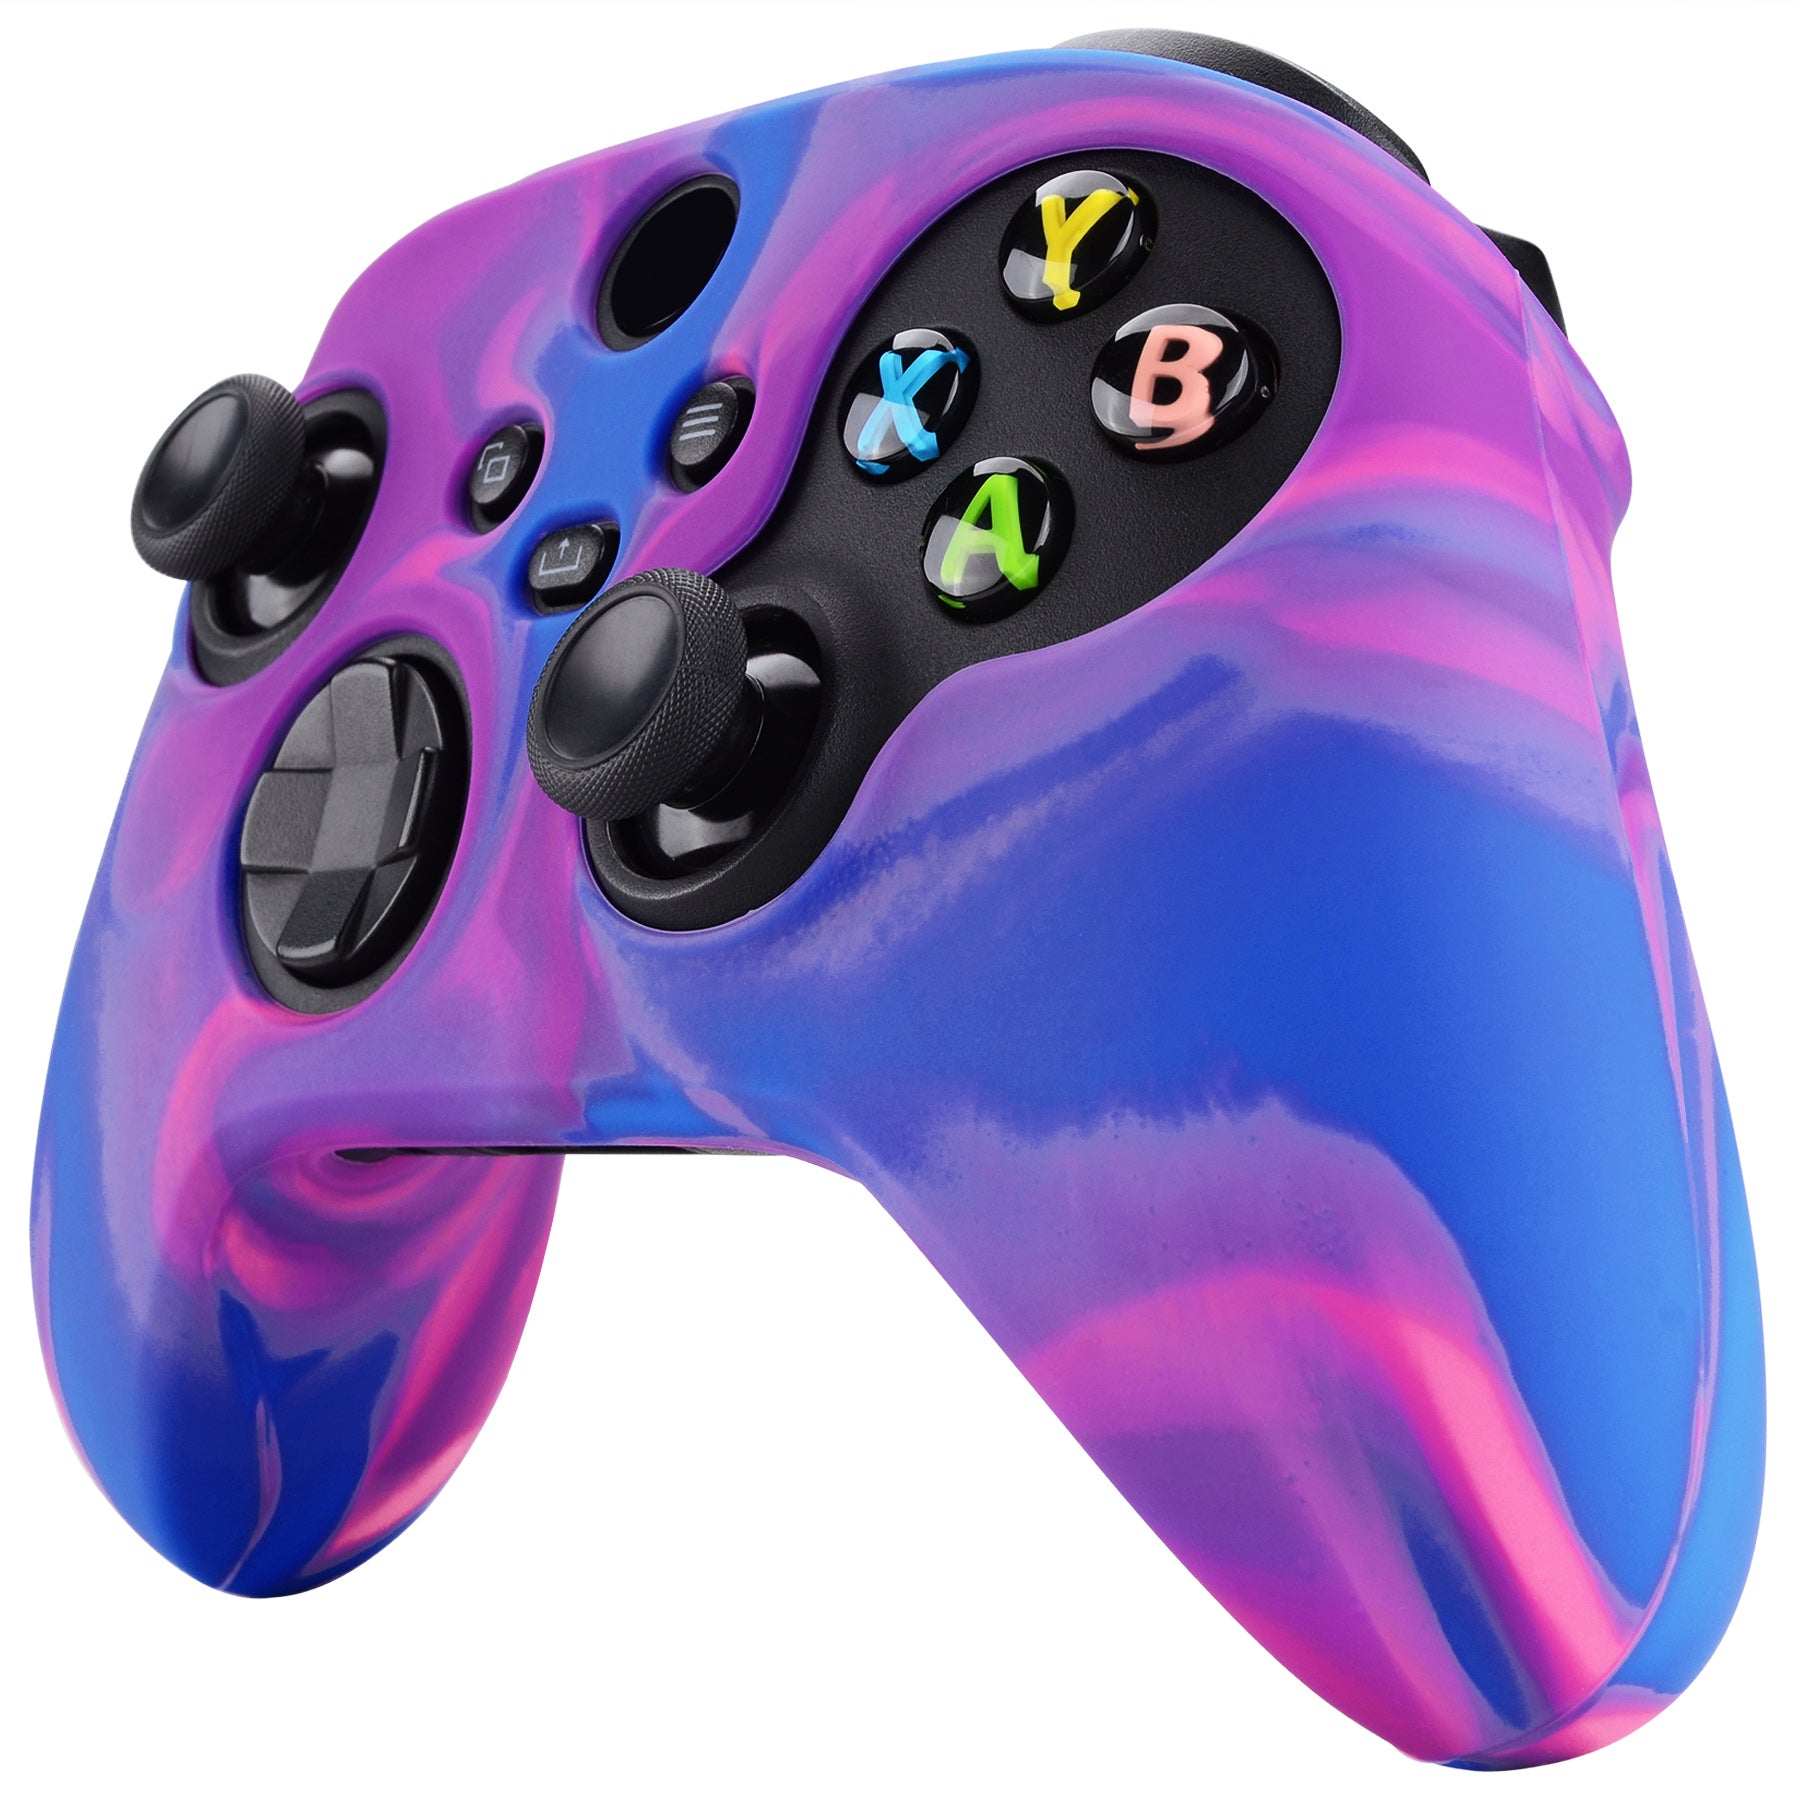 PlayVital Tri-Color Pink & Purple & Blue Camouflage Anti-Slip Silicone Cover Skin for Xbox Series X Controller, Soft Rubber Case Protector for Xbox Series S Controller with Black Thumb Grip Caps - BLX3015 PlayVital